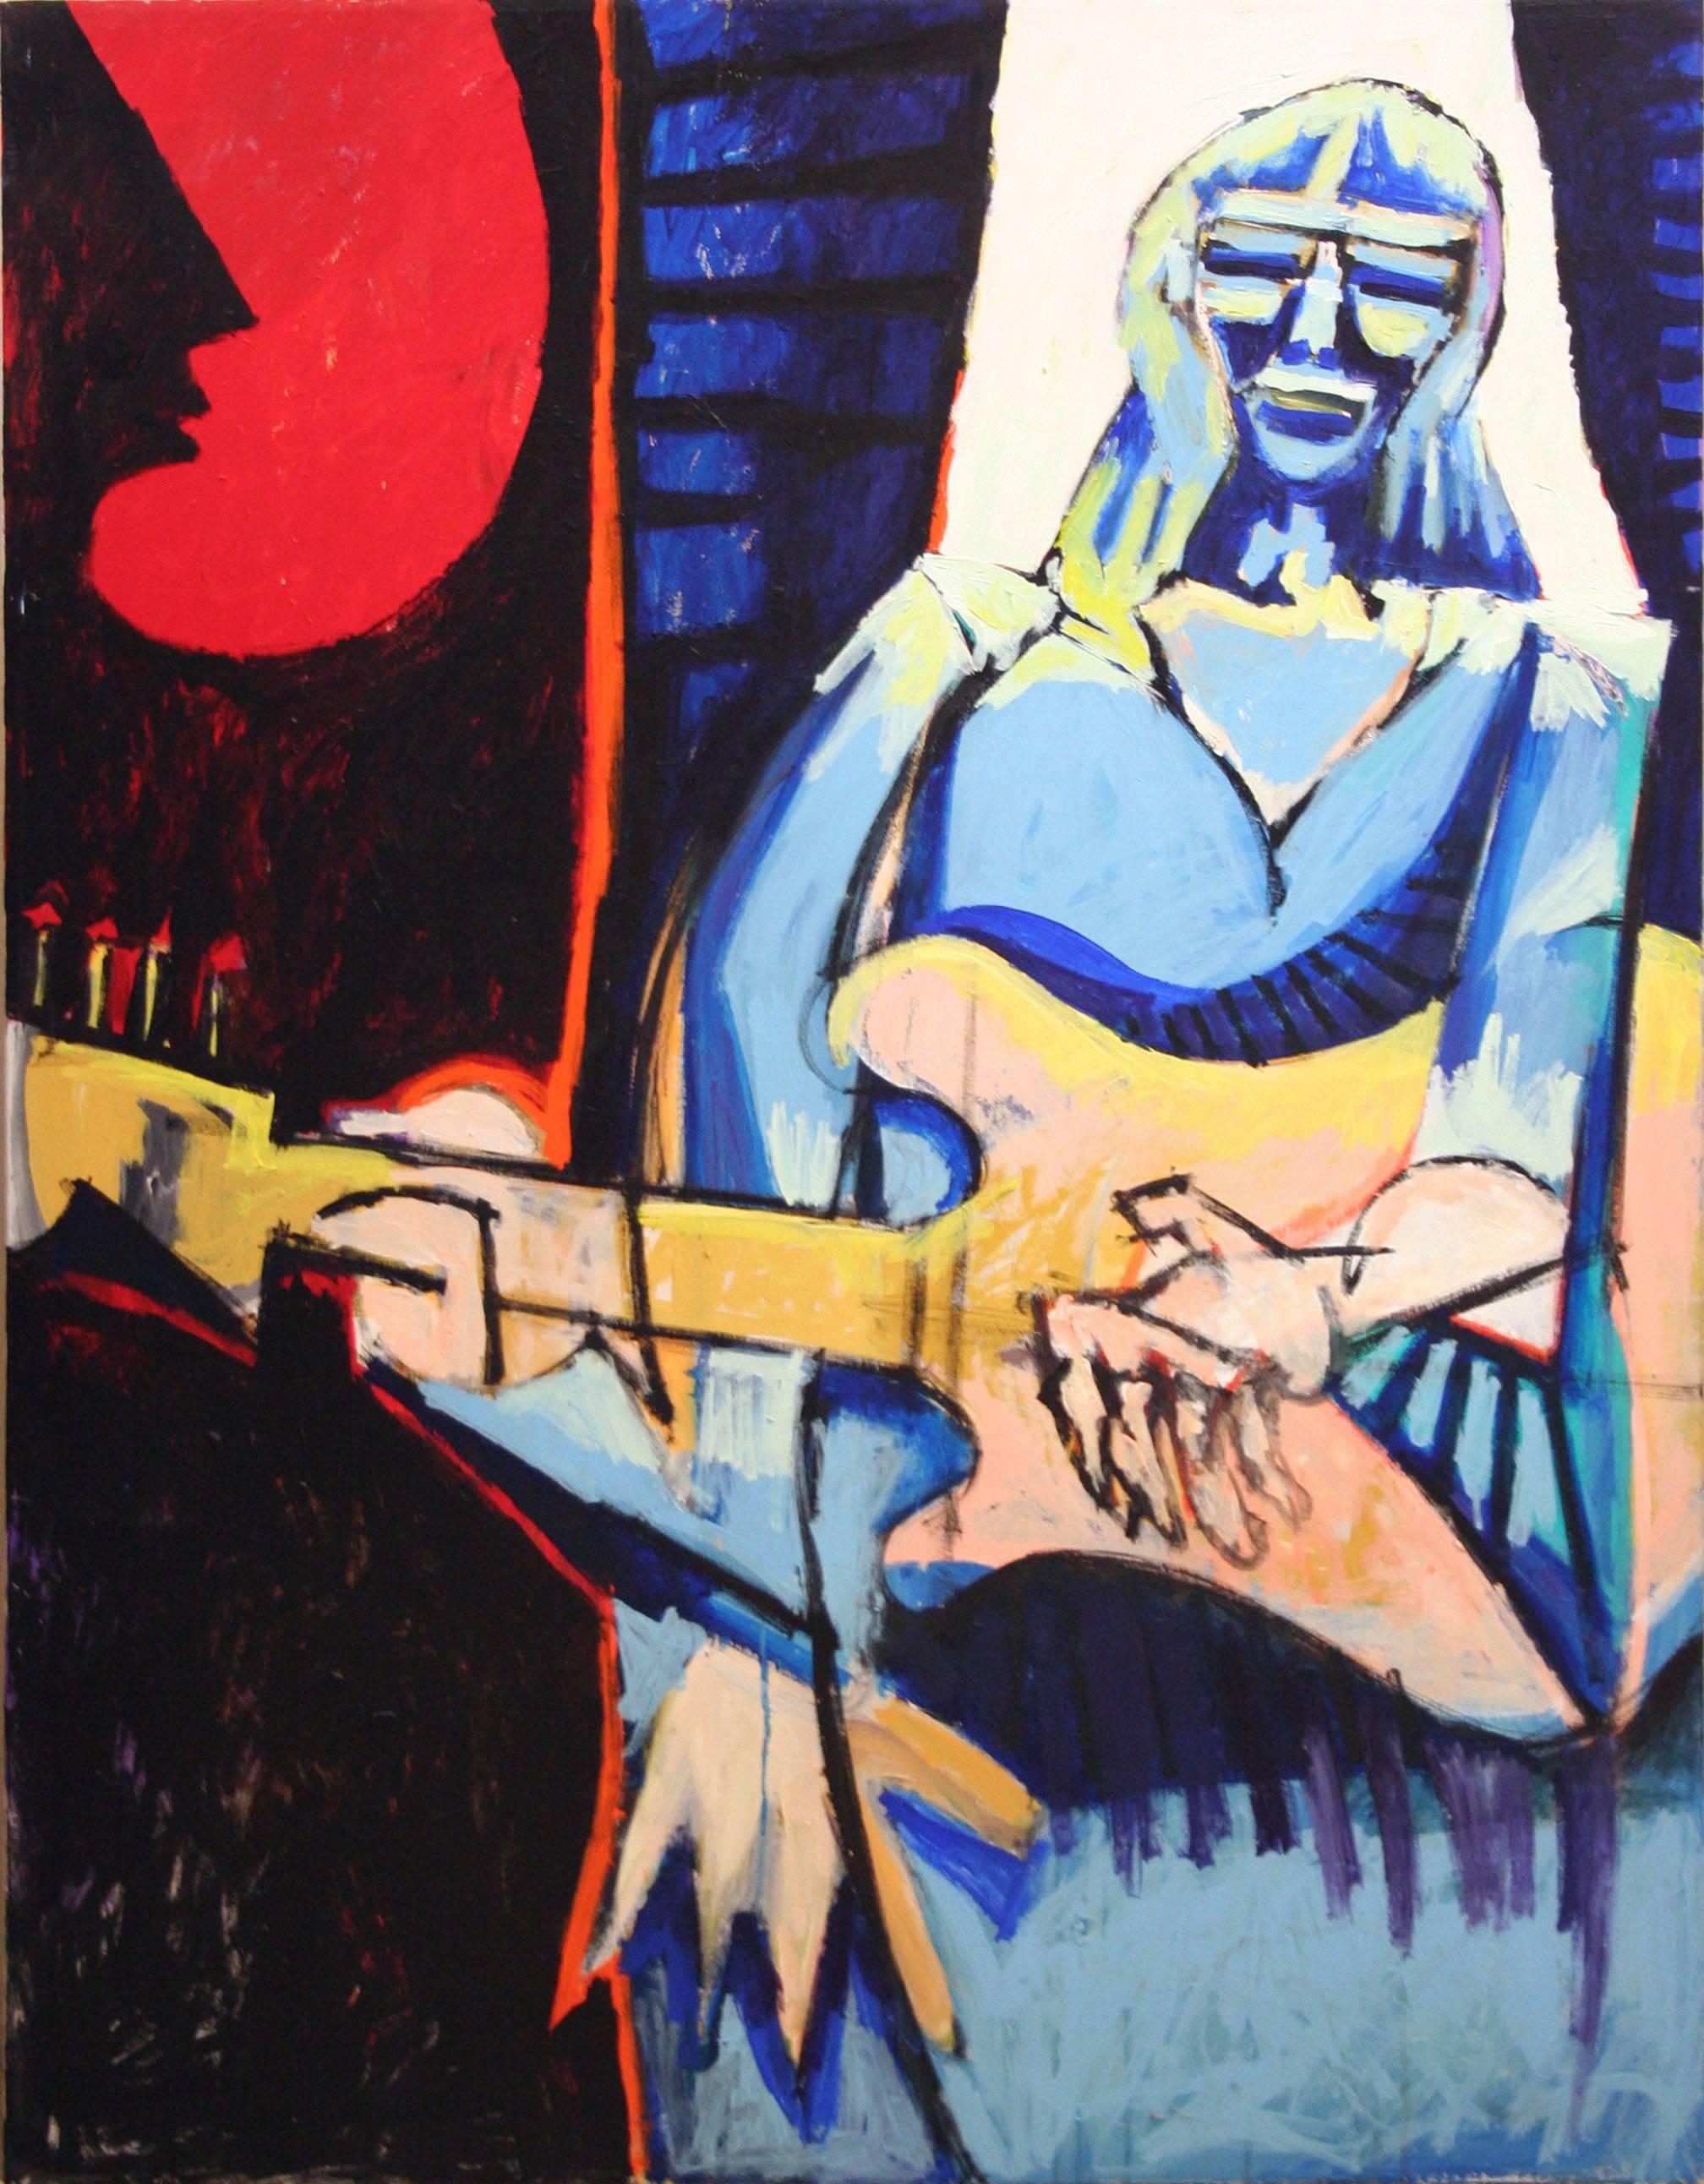 Michael William Eggleston Figurative Painting - Courtney Love and Guitar Abstract Expressionist Figurative